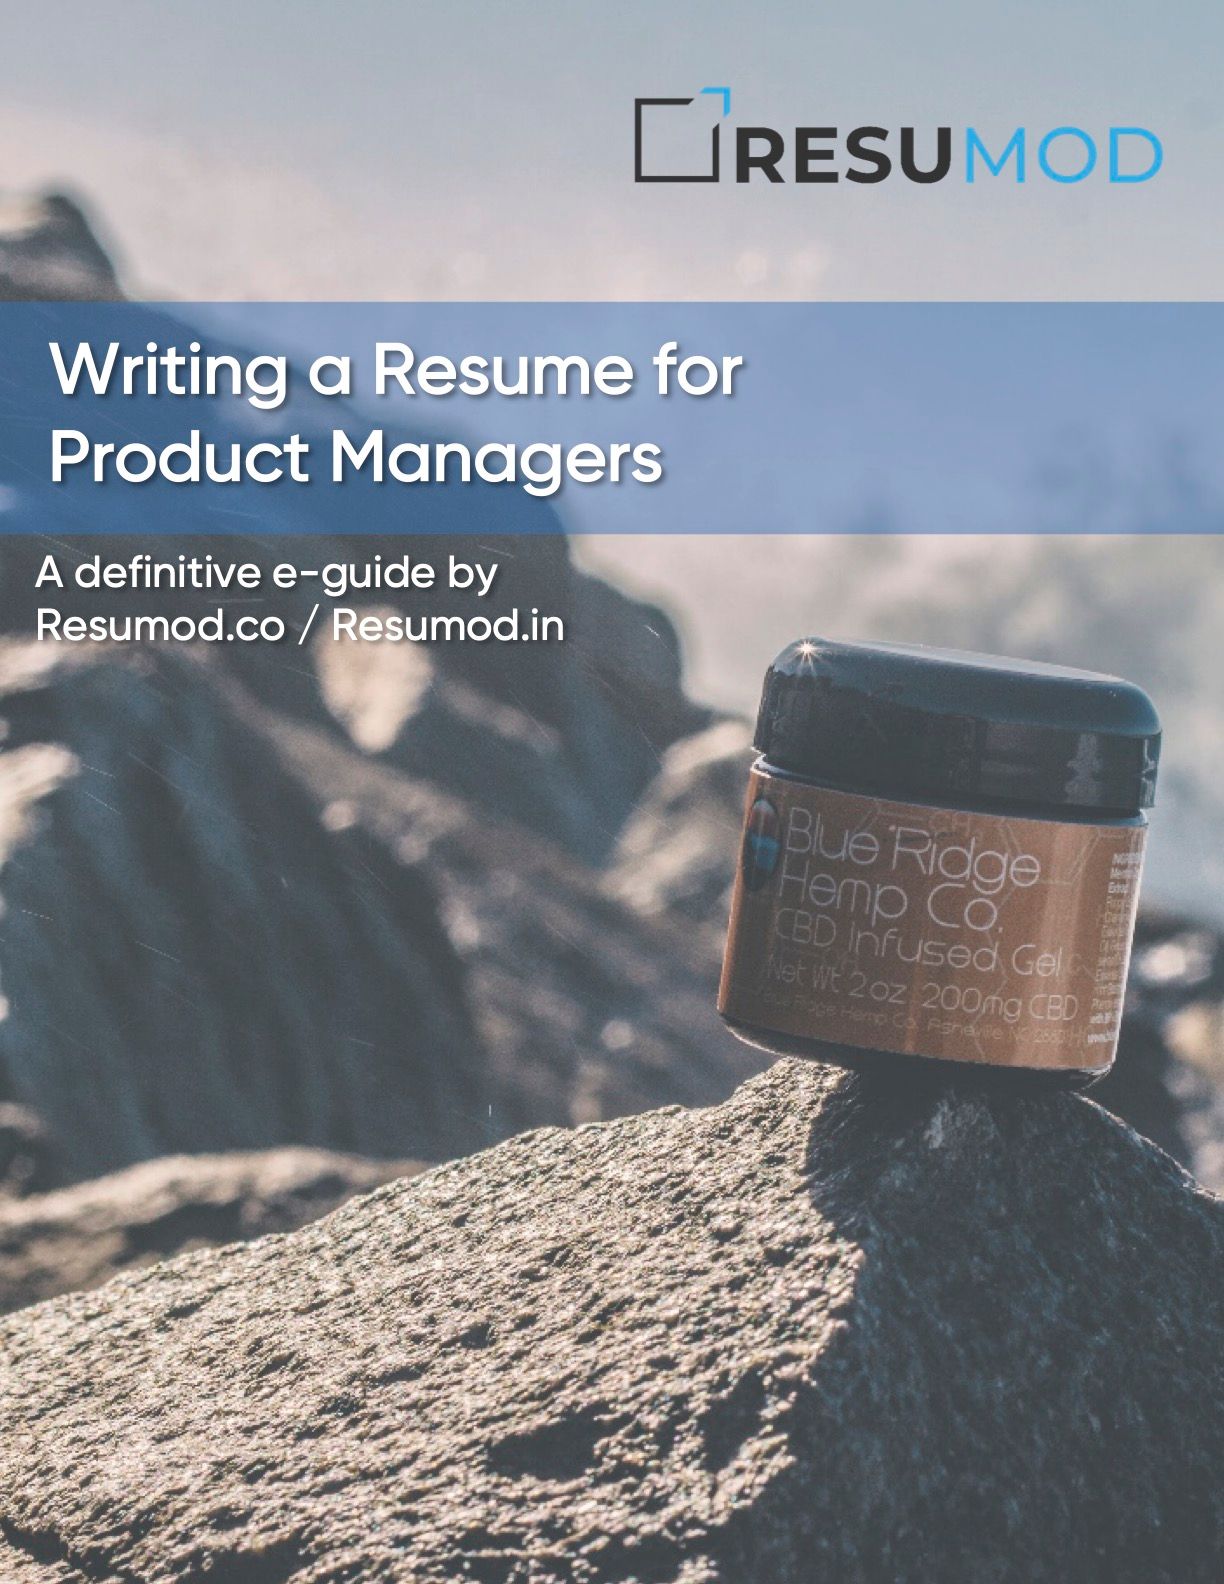 E-Book on Writing a Resume for Product Managers